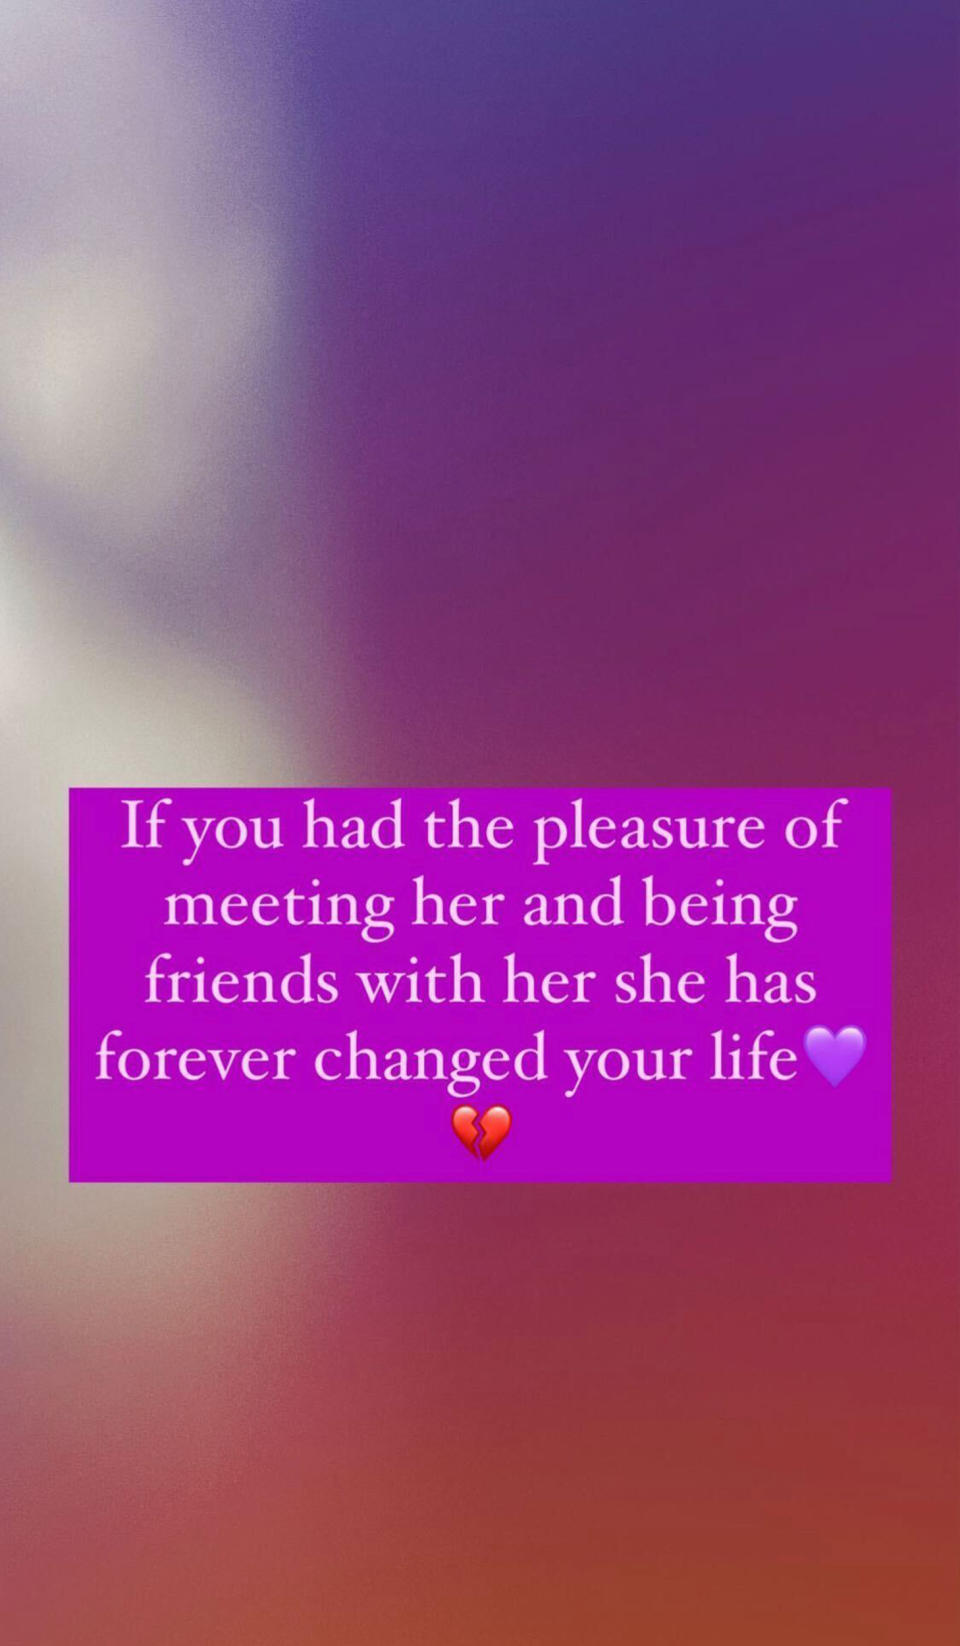 Bailey shared several anguished messages about her daughter's death in her Instagram story. (@brookebaileyinc via Instagram)